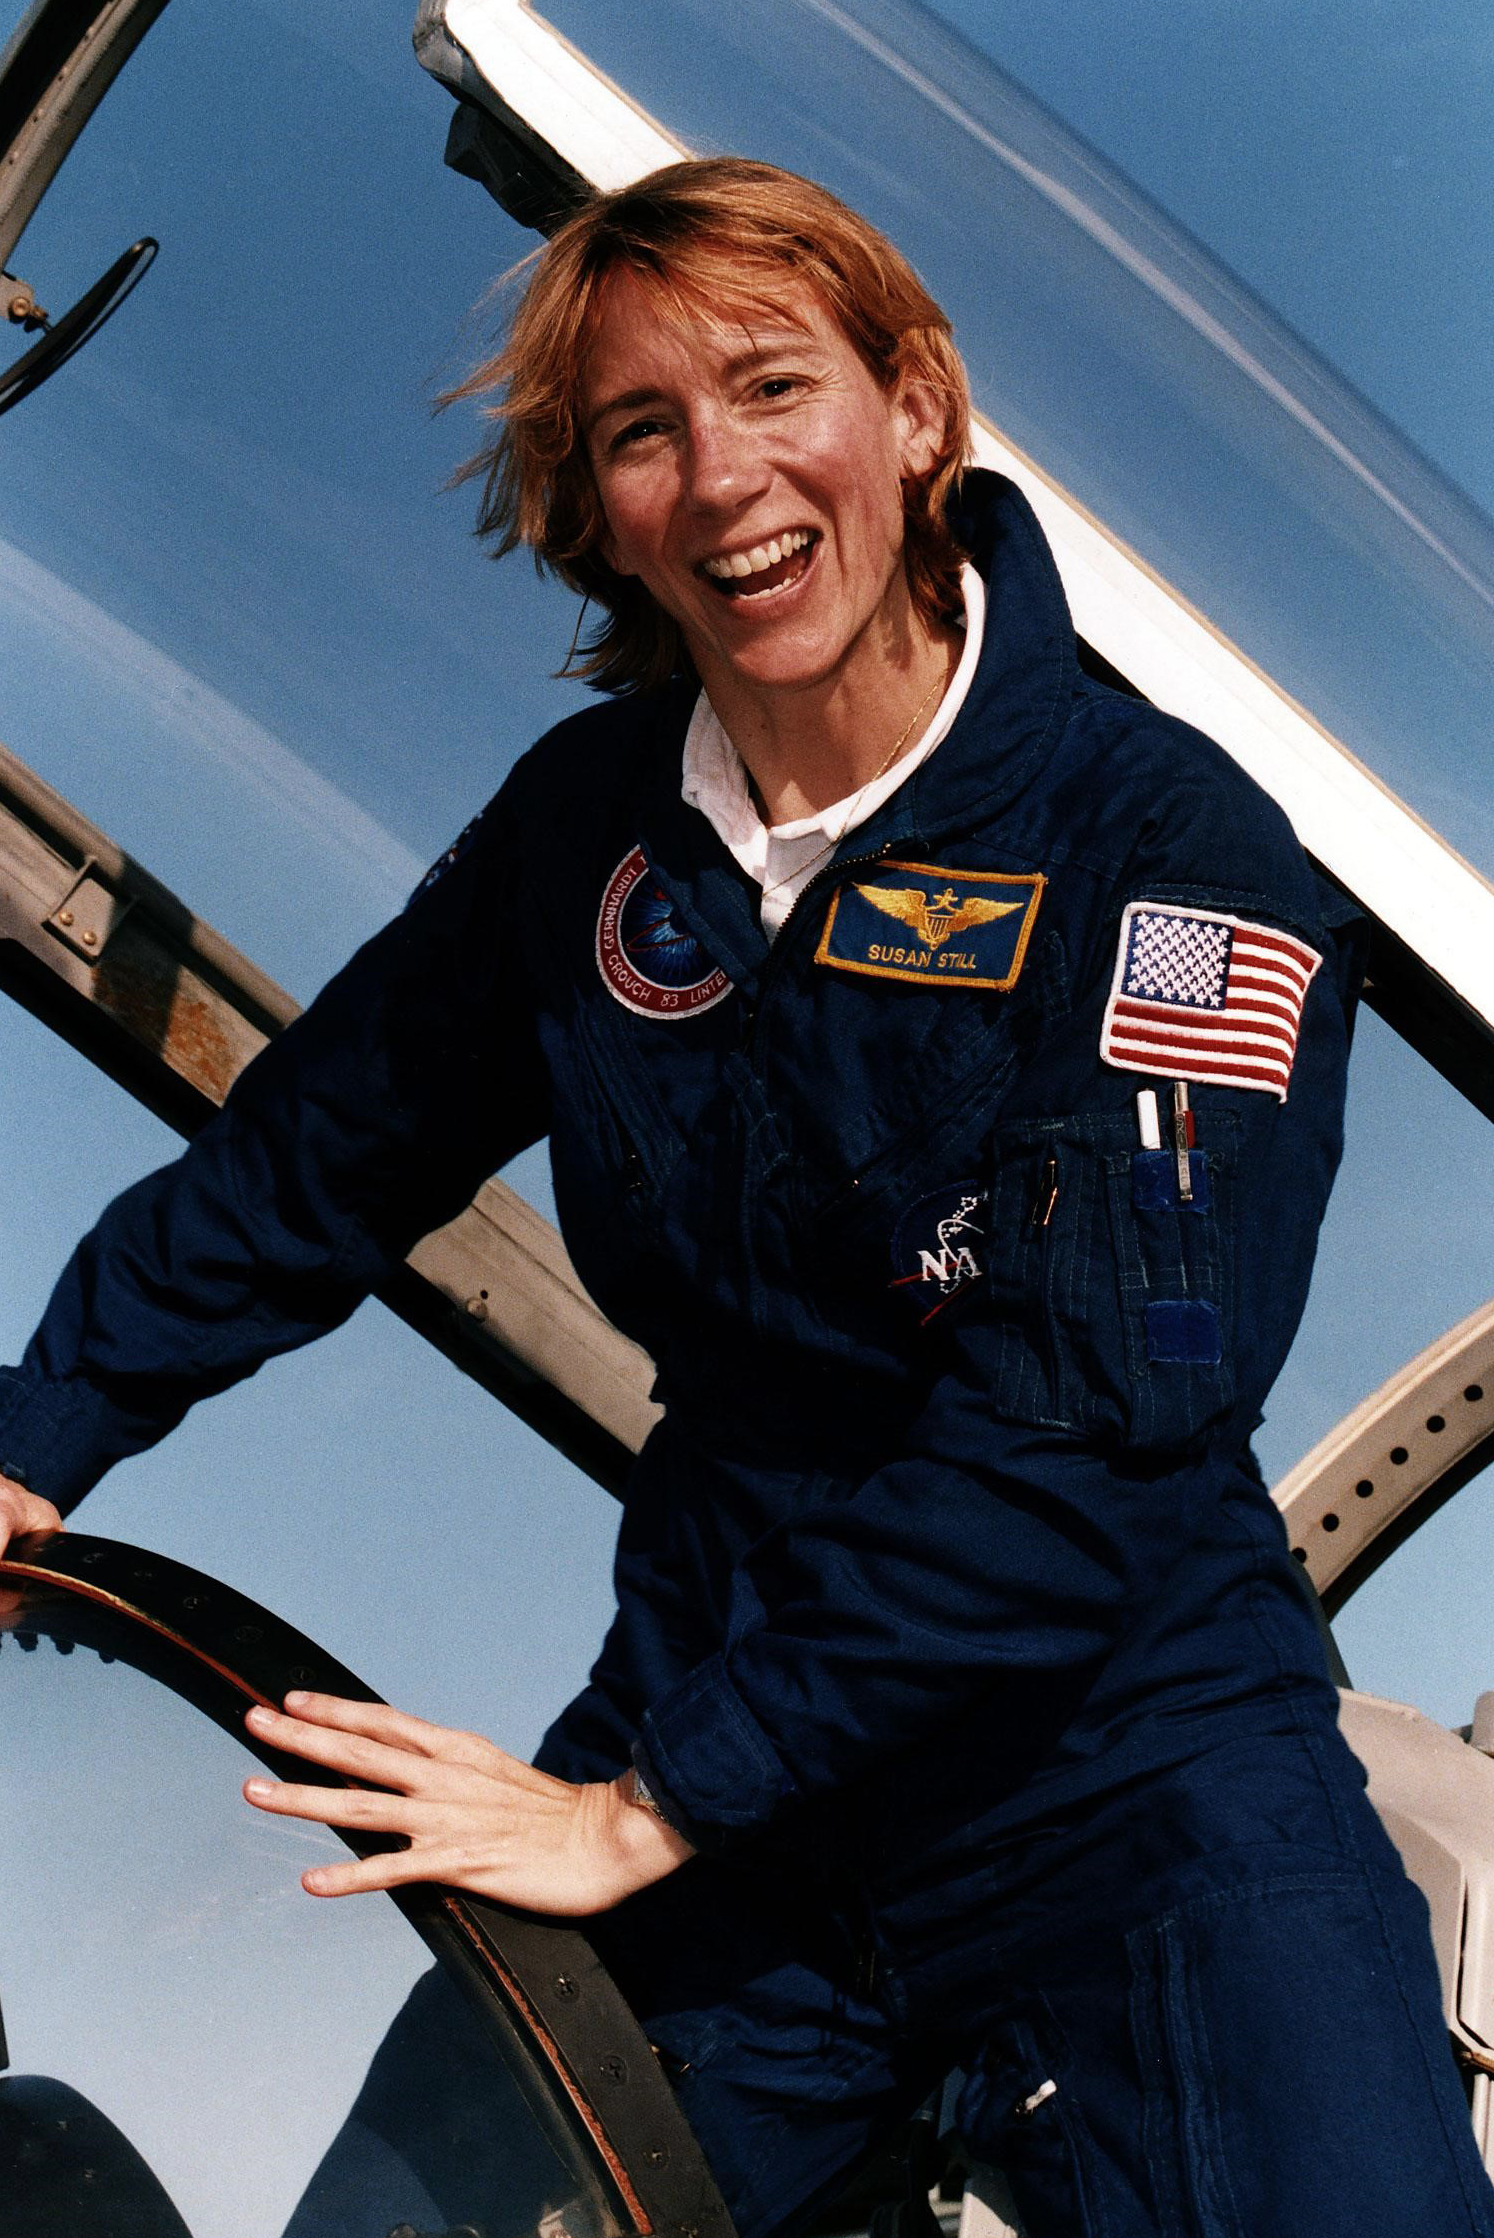 woman is standing next to the open canopy of an airplane cockpit.  she is wearing a flight suit